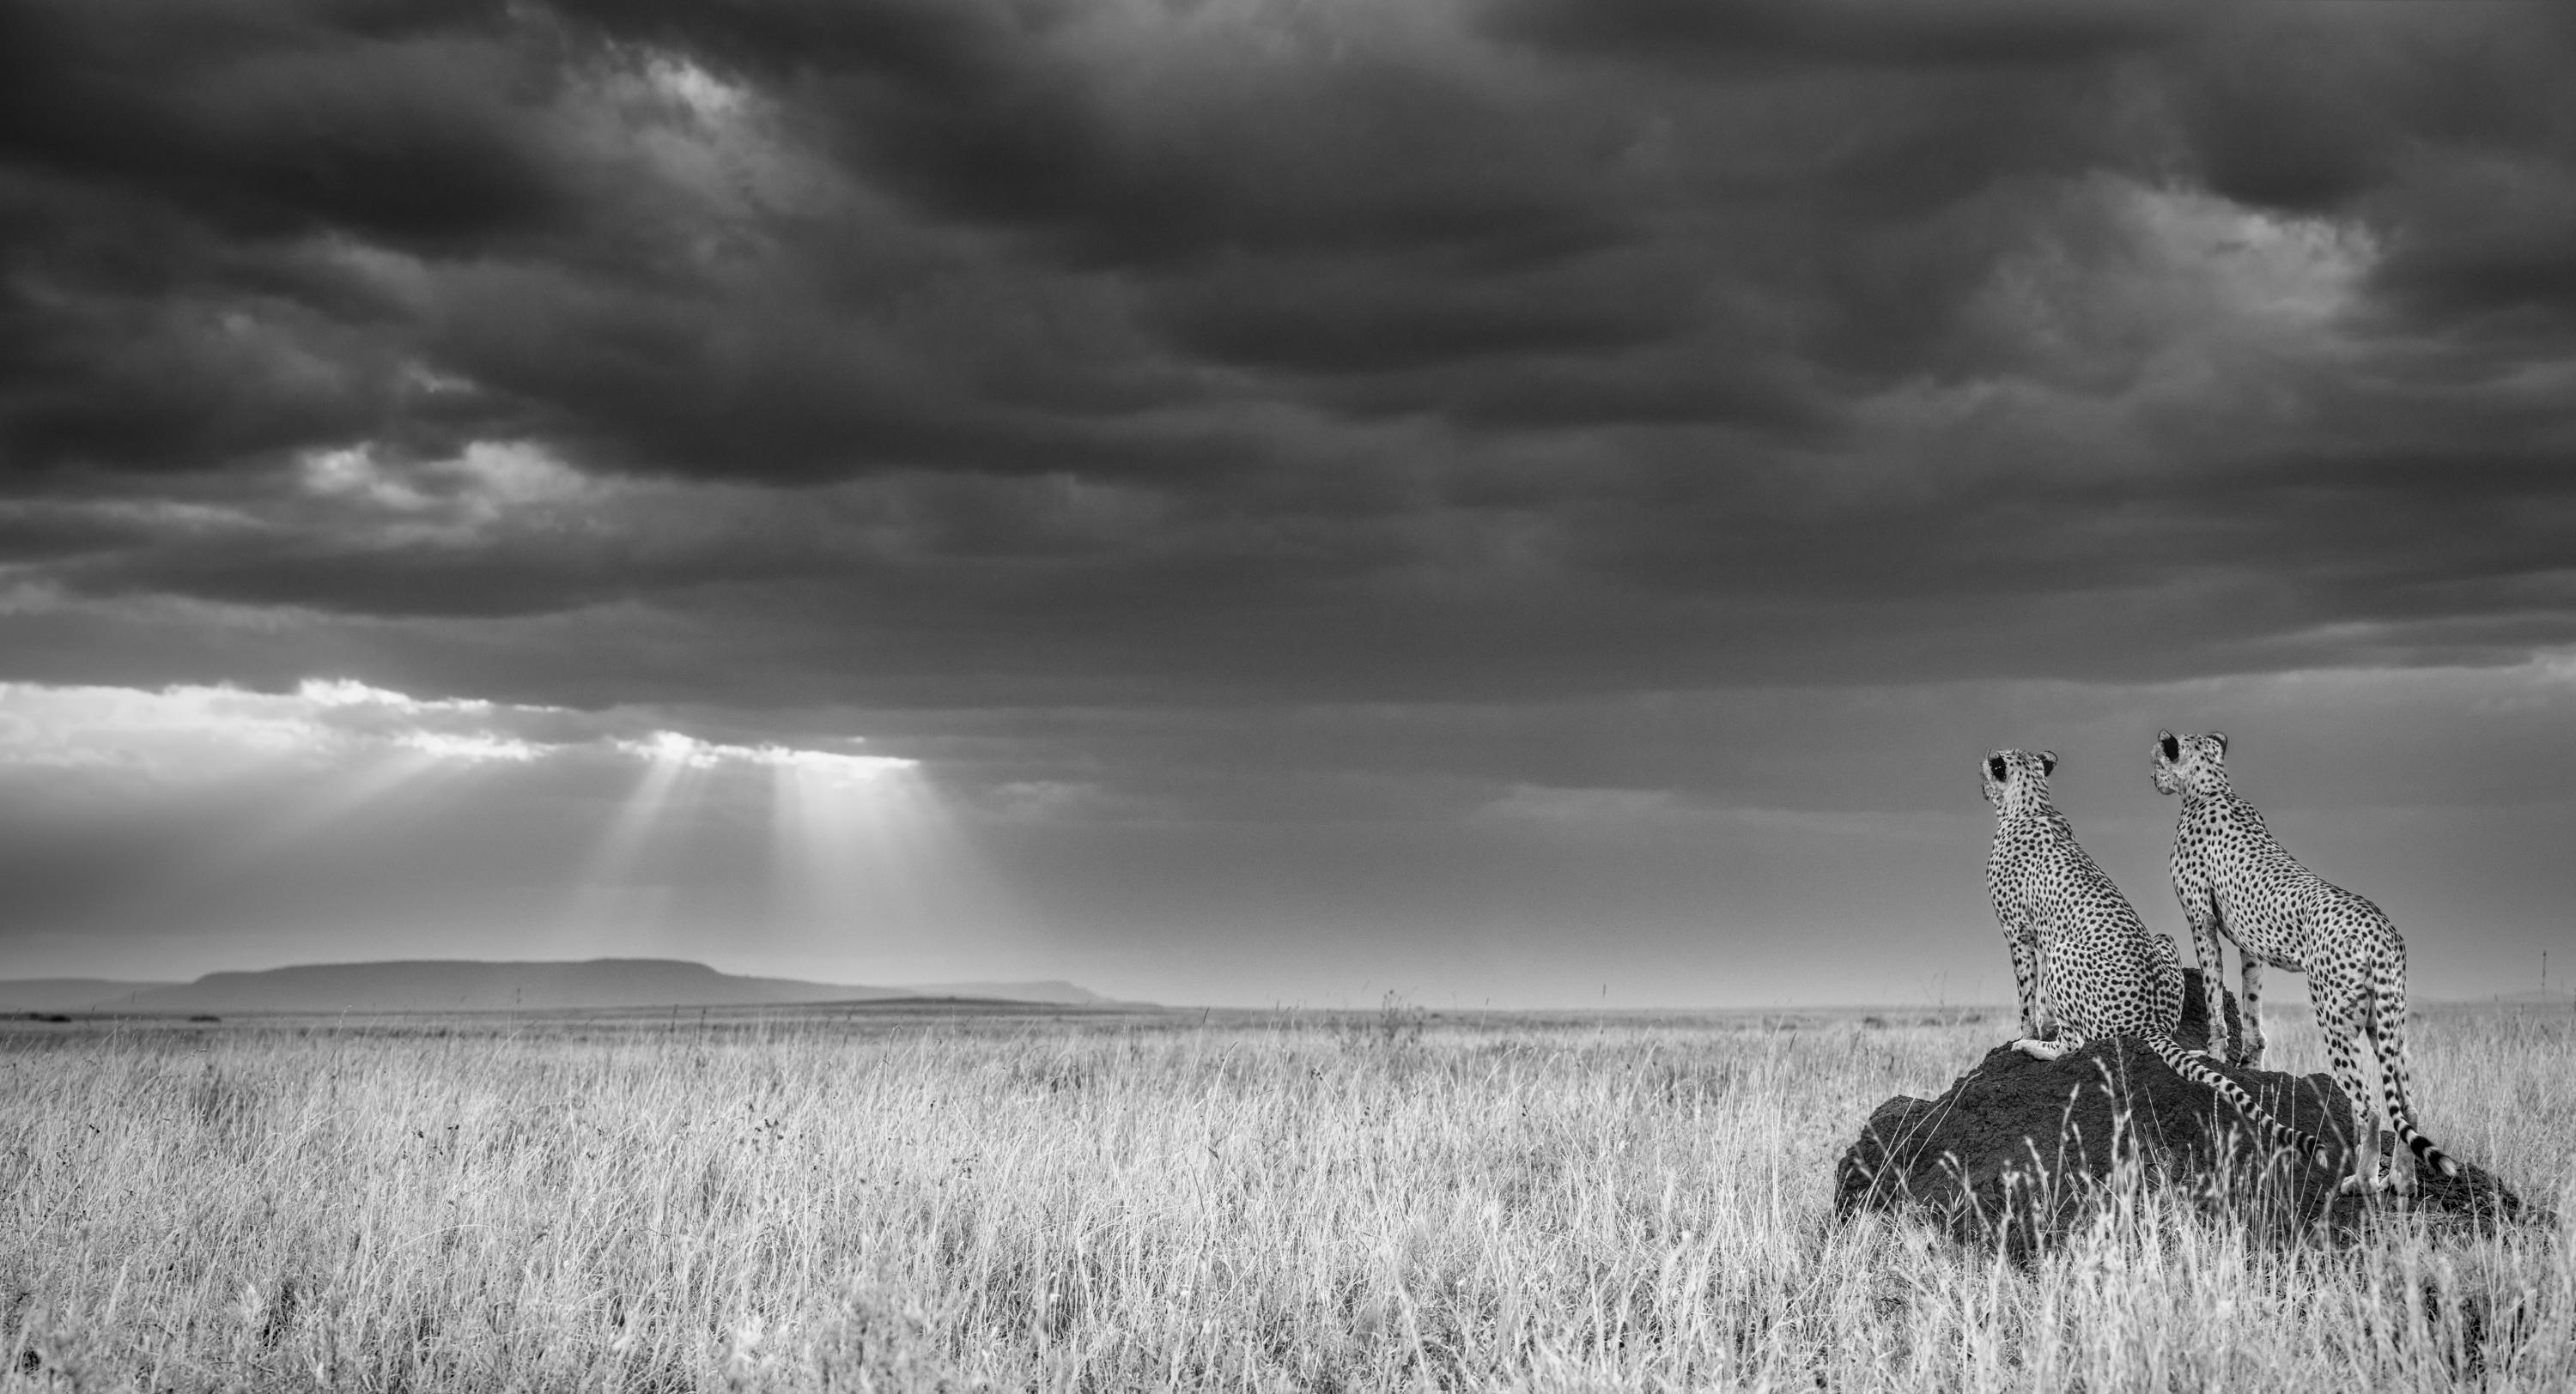 "When I returned to The Serengeti in October 2022, I was determined to capture a cheetah portrait like no other I had seen before, but I didn't expect to make a portrait excluding my subjects' faces. My usual approach would be to create a striking